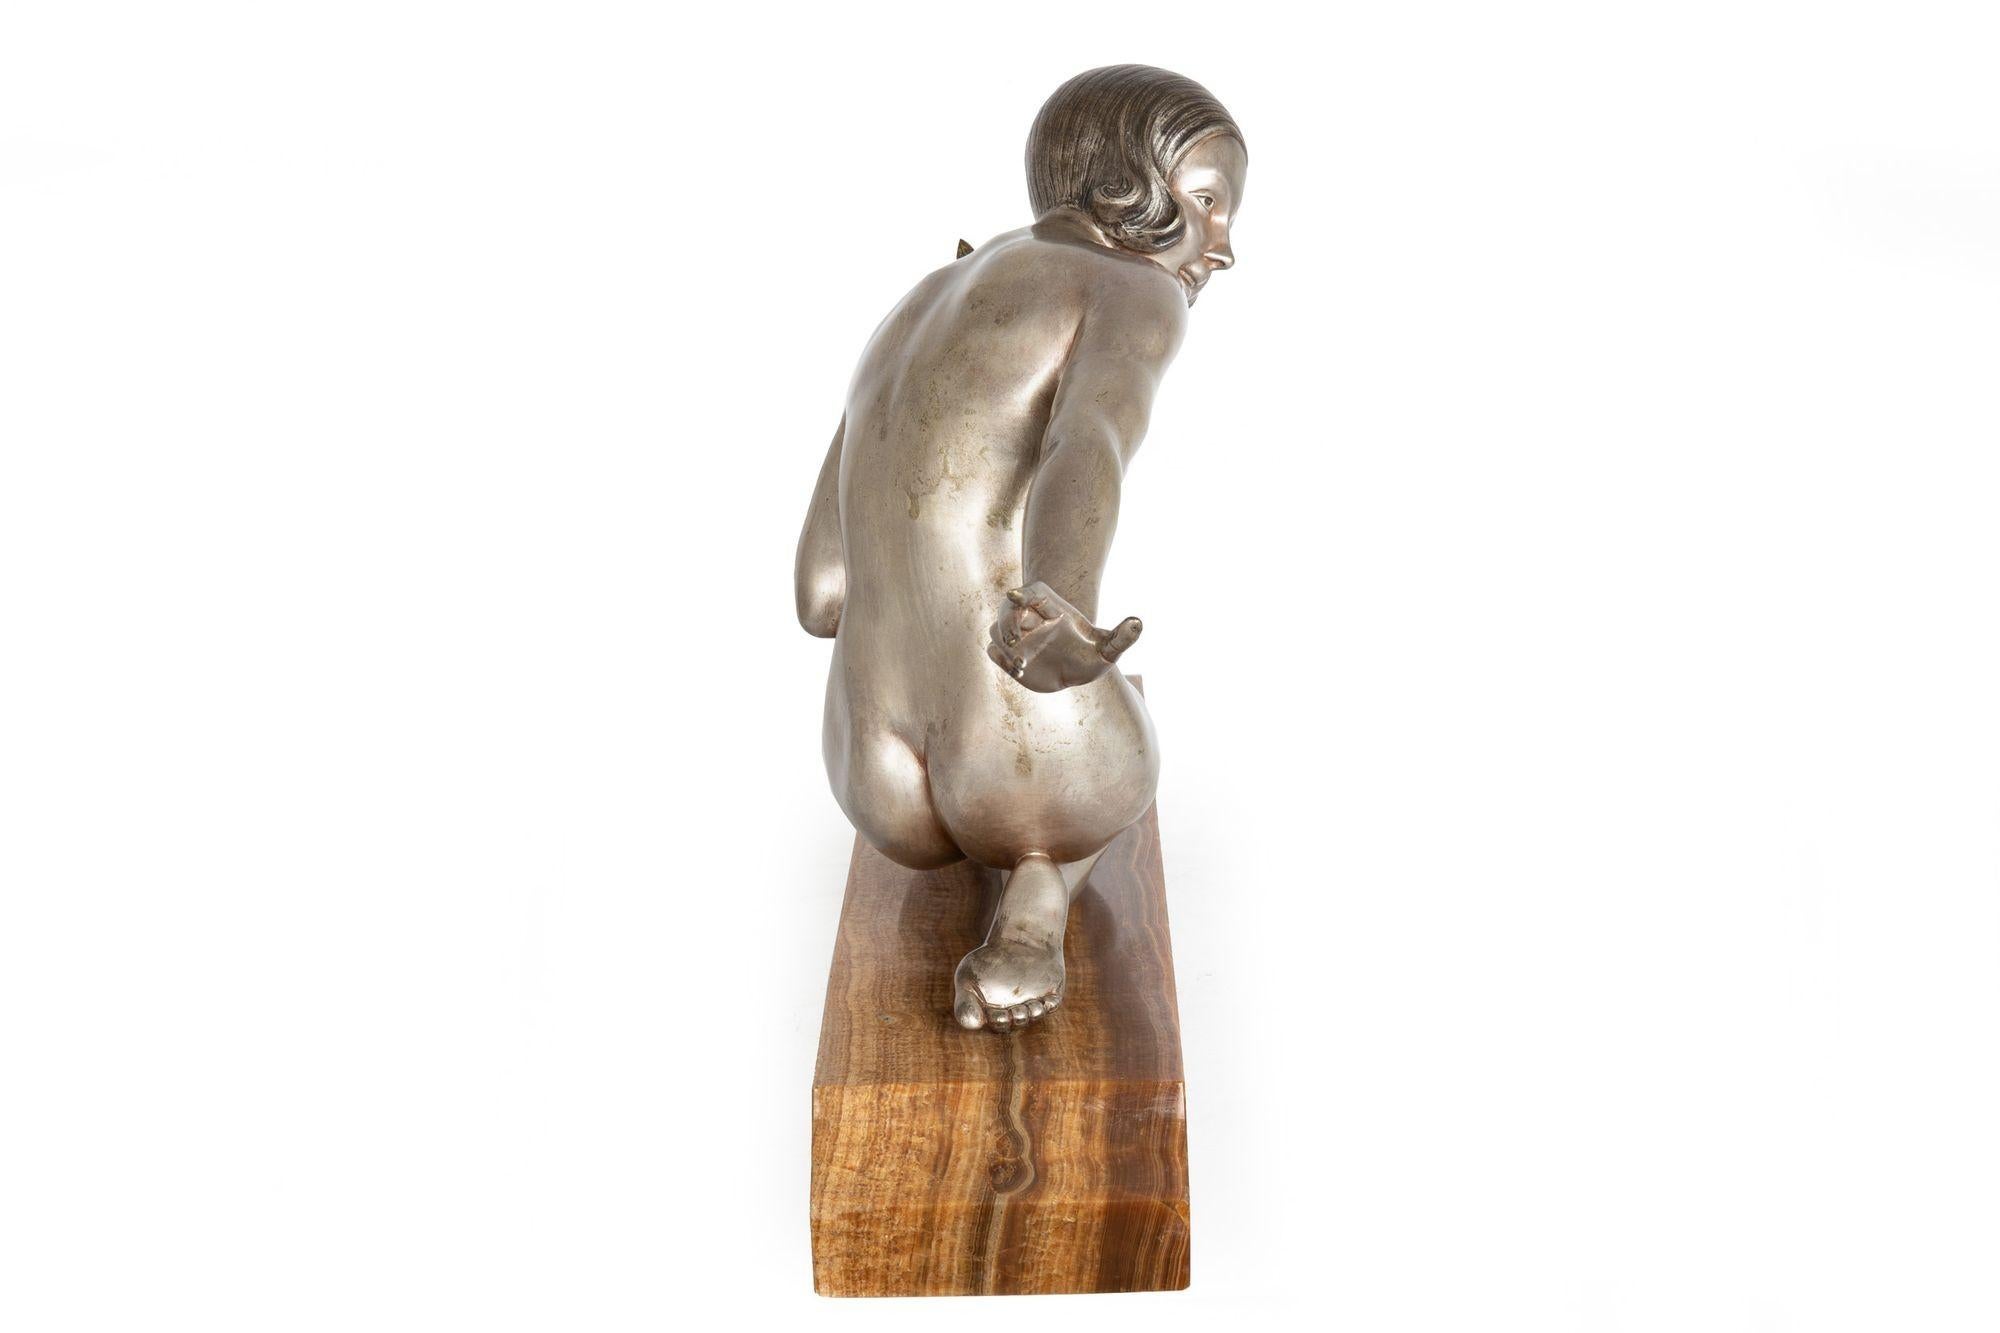 20th Century French Art Deco Silvered Bronze Sculpture “Woman w/ Bird” by Armand Godard For Sale